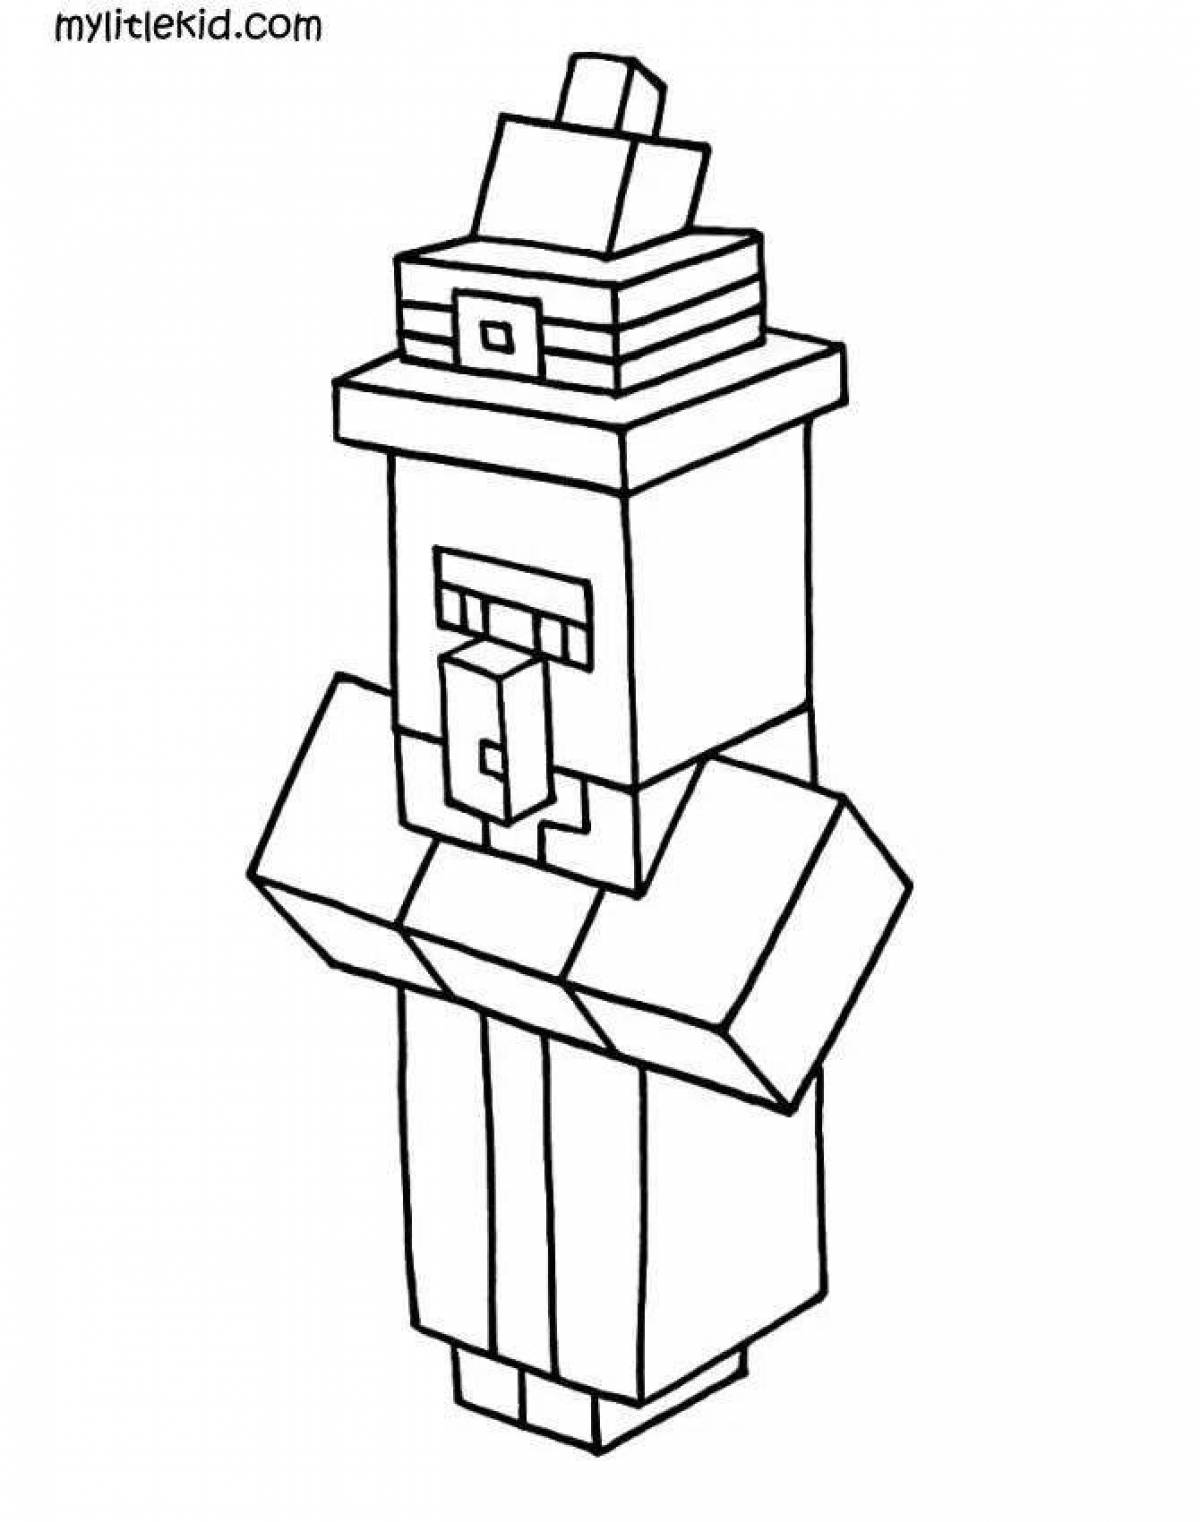 Colorful beautiful minecraft villager coloring page